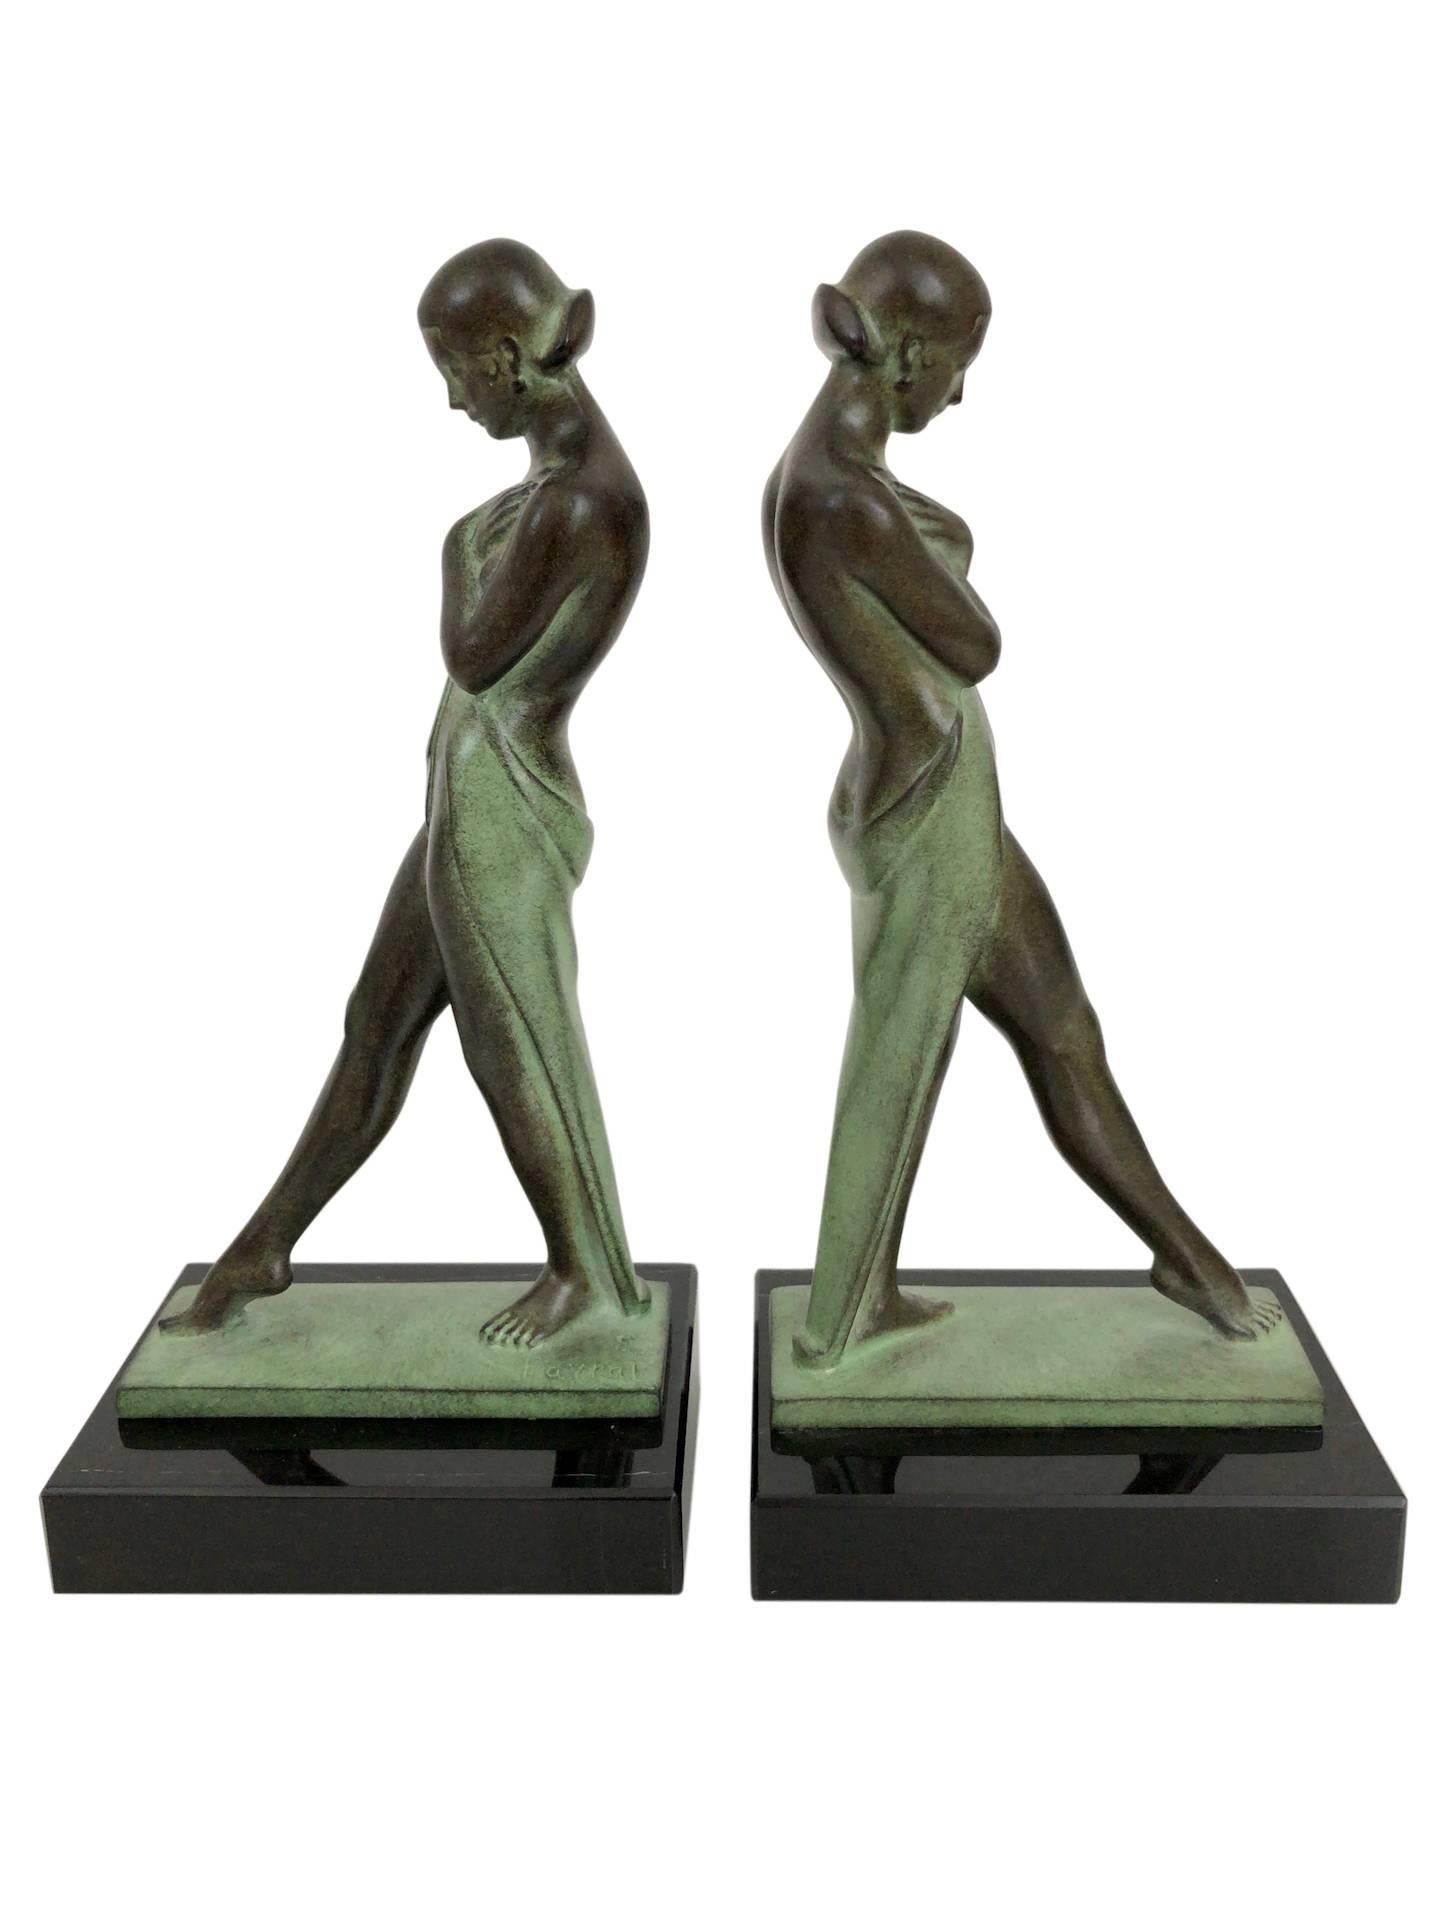 “Meditation”
Designed in France during the roaring 1920s by “Fayral”, which is one of the pseudonymes from “Pierre Le Faguays” (1892-1962)
Original “Max Le Verrier”
Art Deco style, France 

Bookends made in “Régule” (spelter)
Socle in black